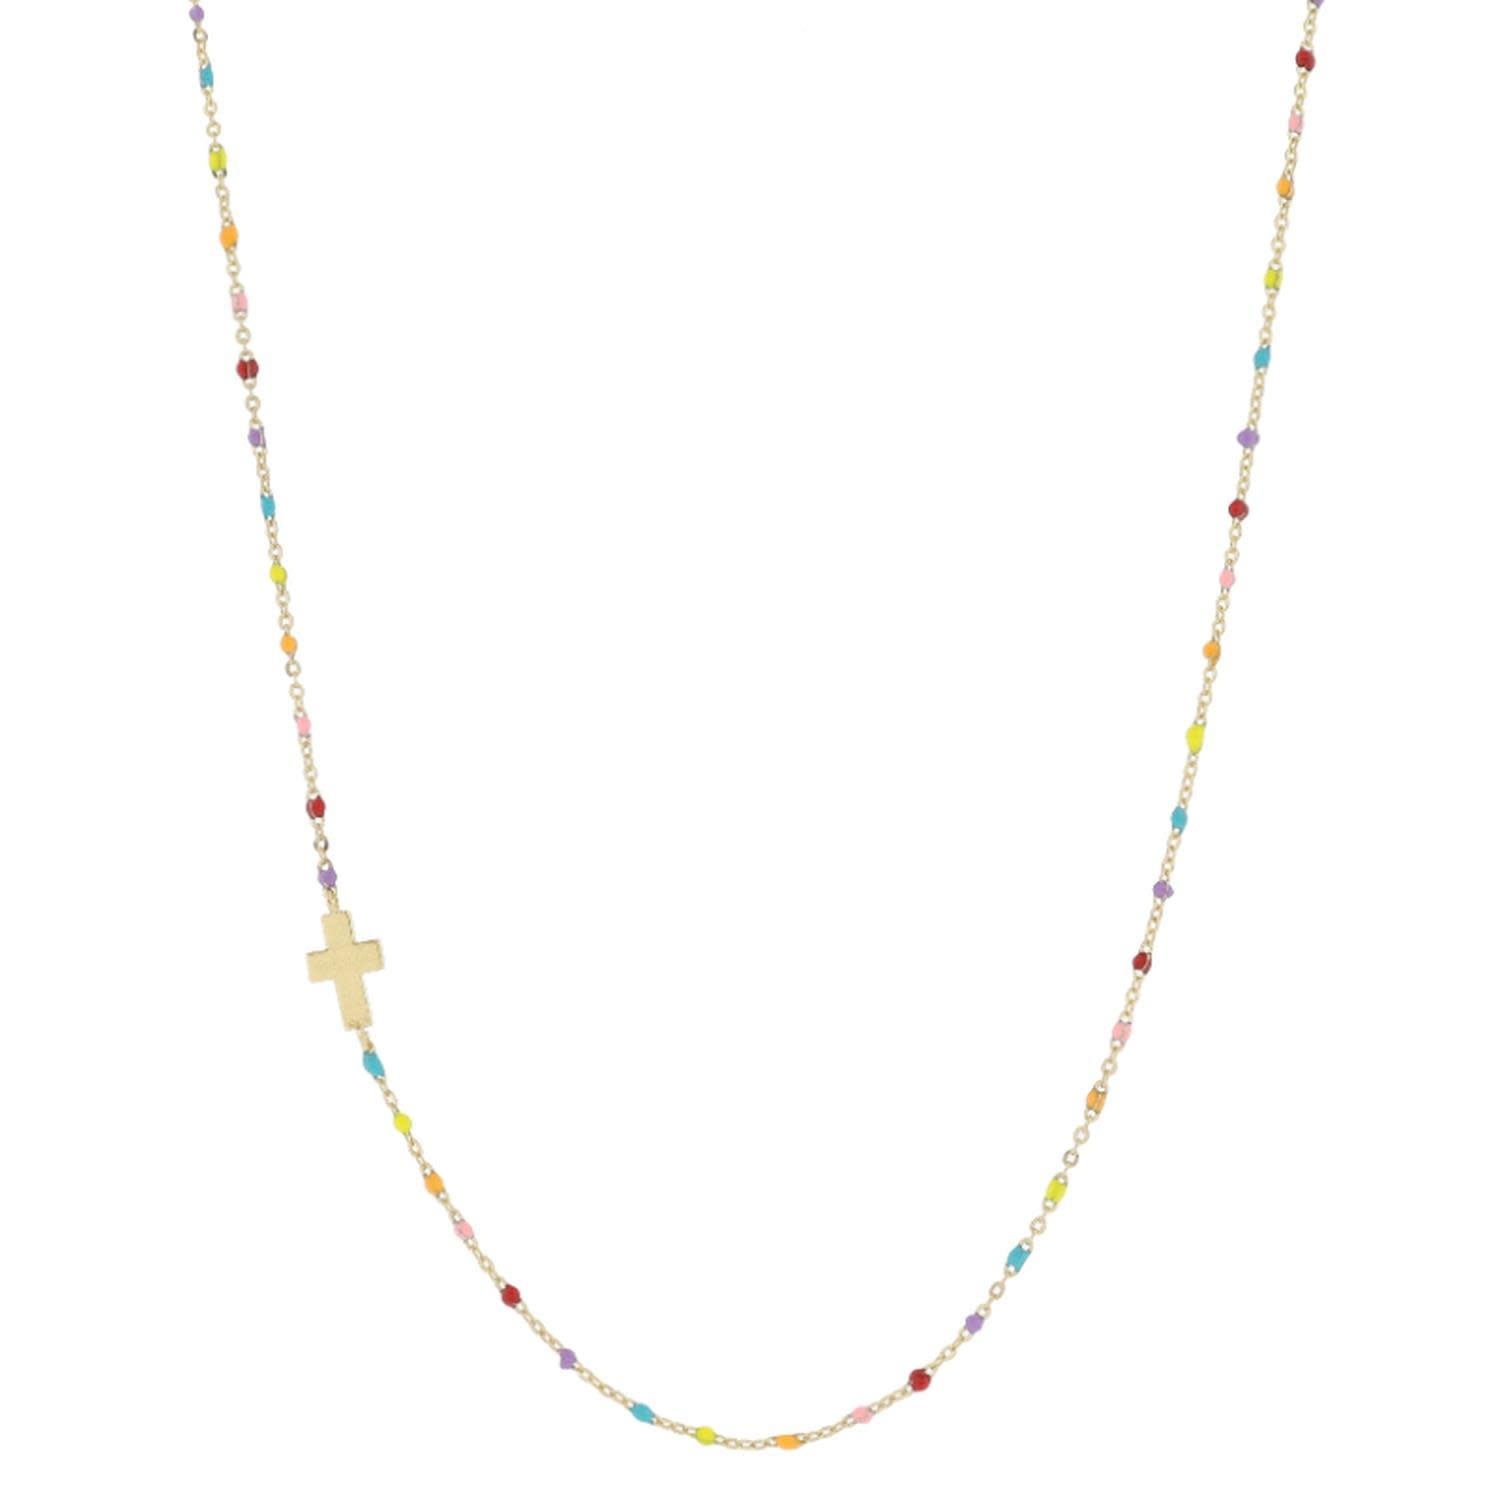 Dainty Multi Enamel Satellite Chain with Gold Cross in Chain Necklace